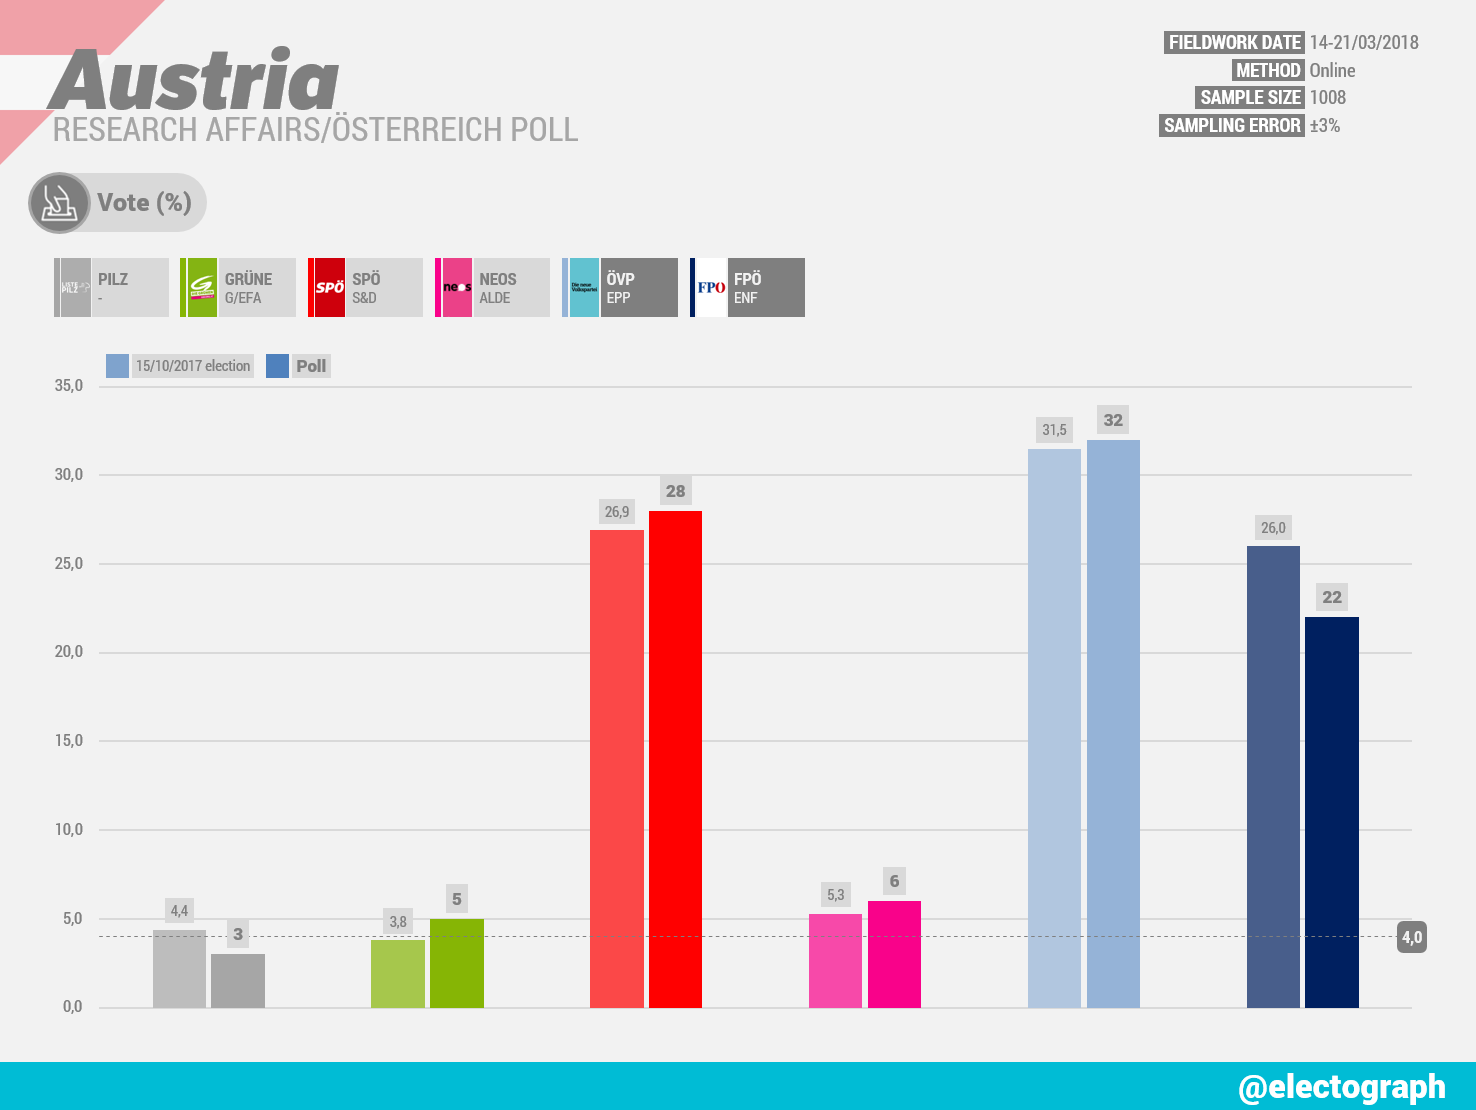 AUSTRIA Research Affairs poll chart for Österreich, March 2018